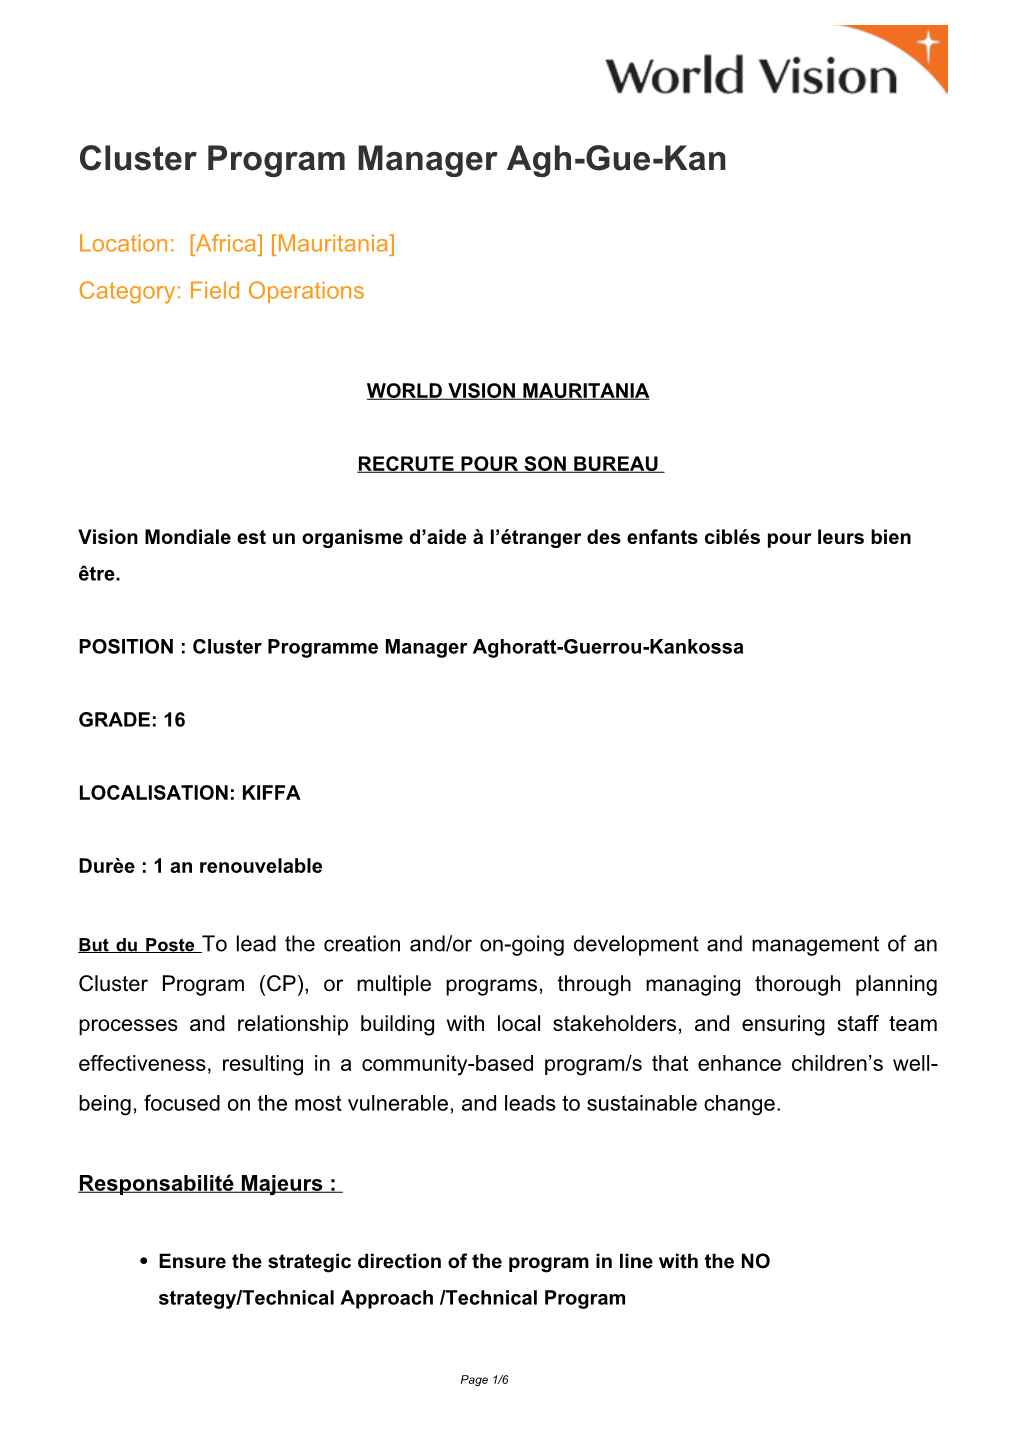 Cluster Program Manager Agh-Gue-Kan